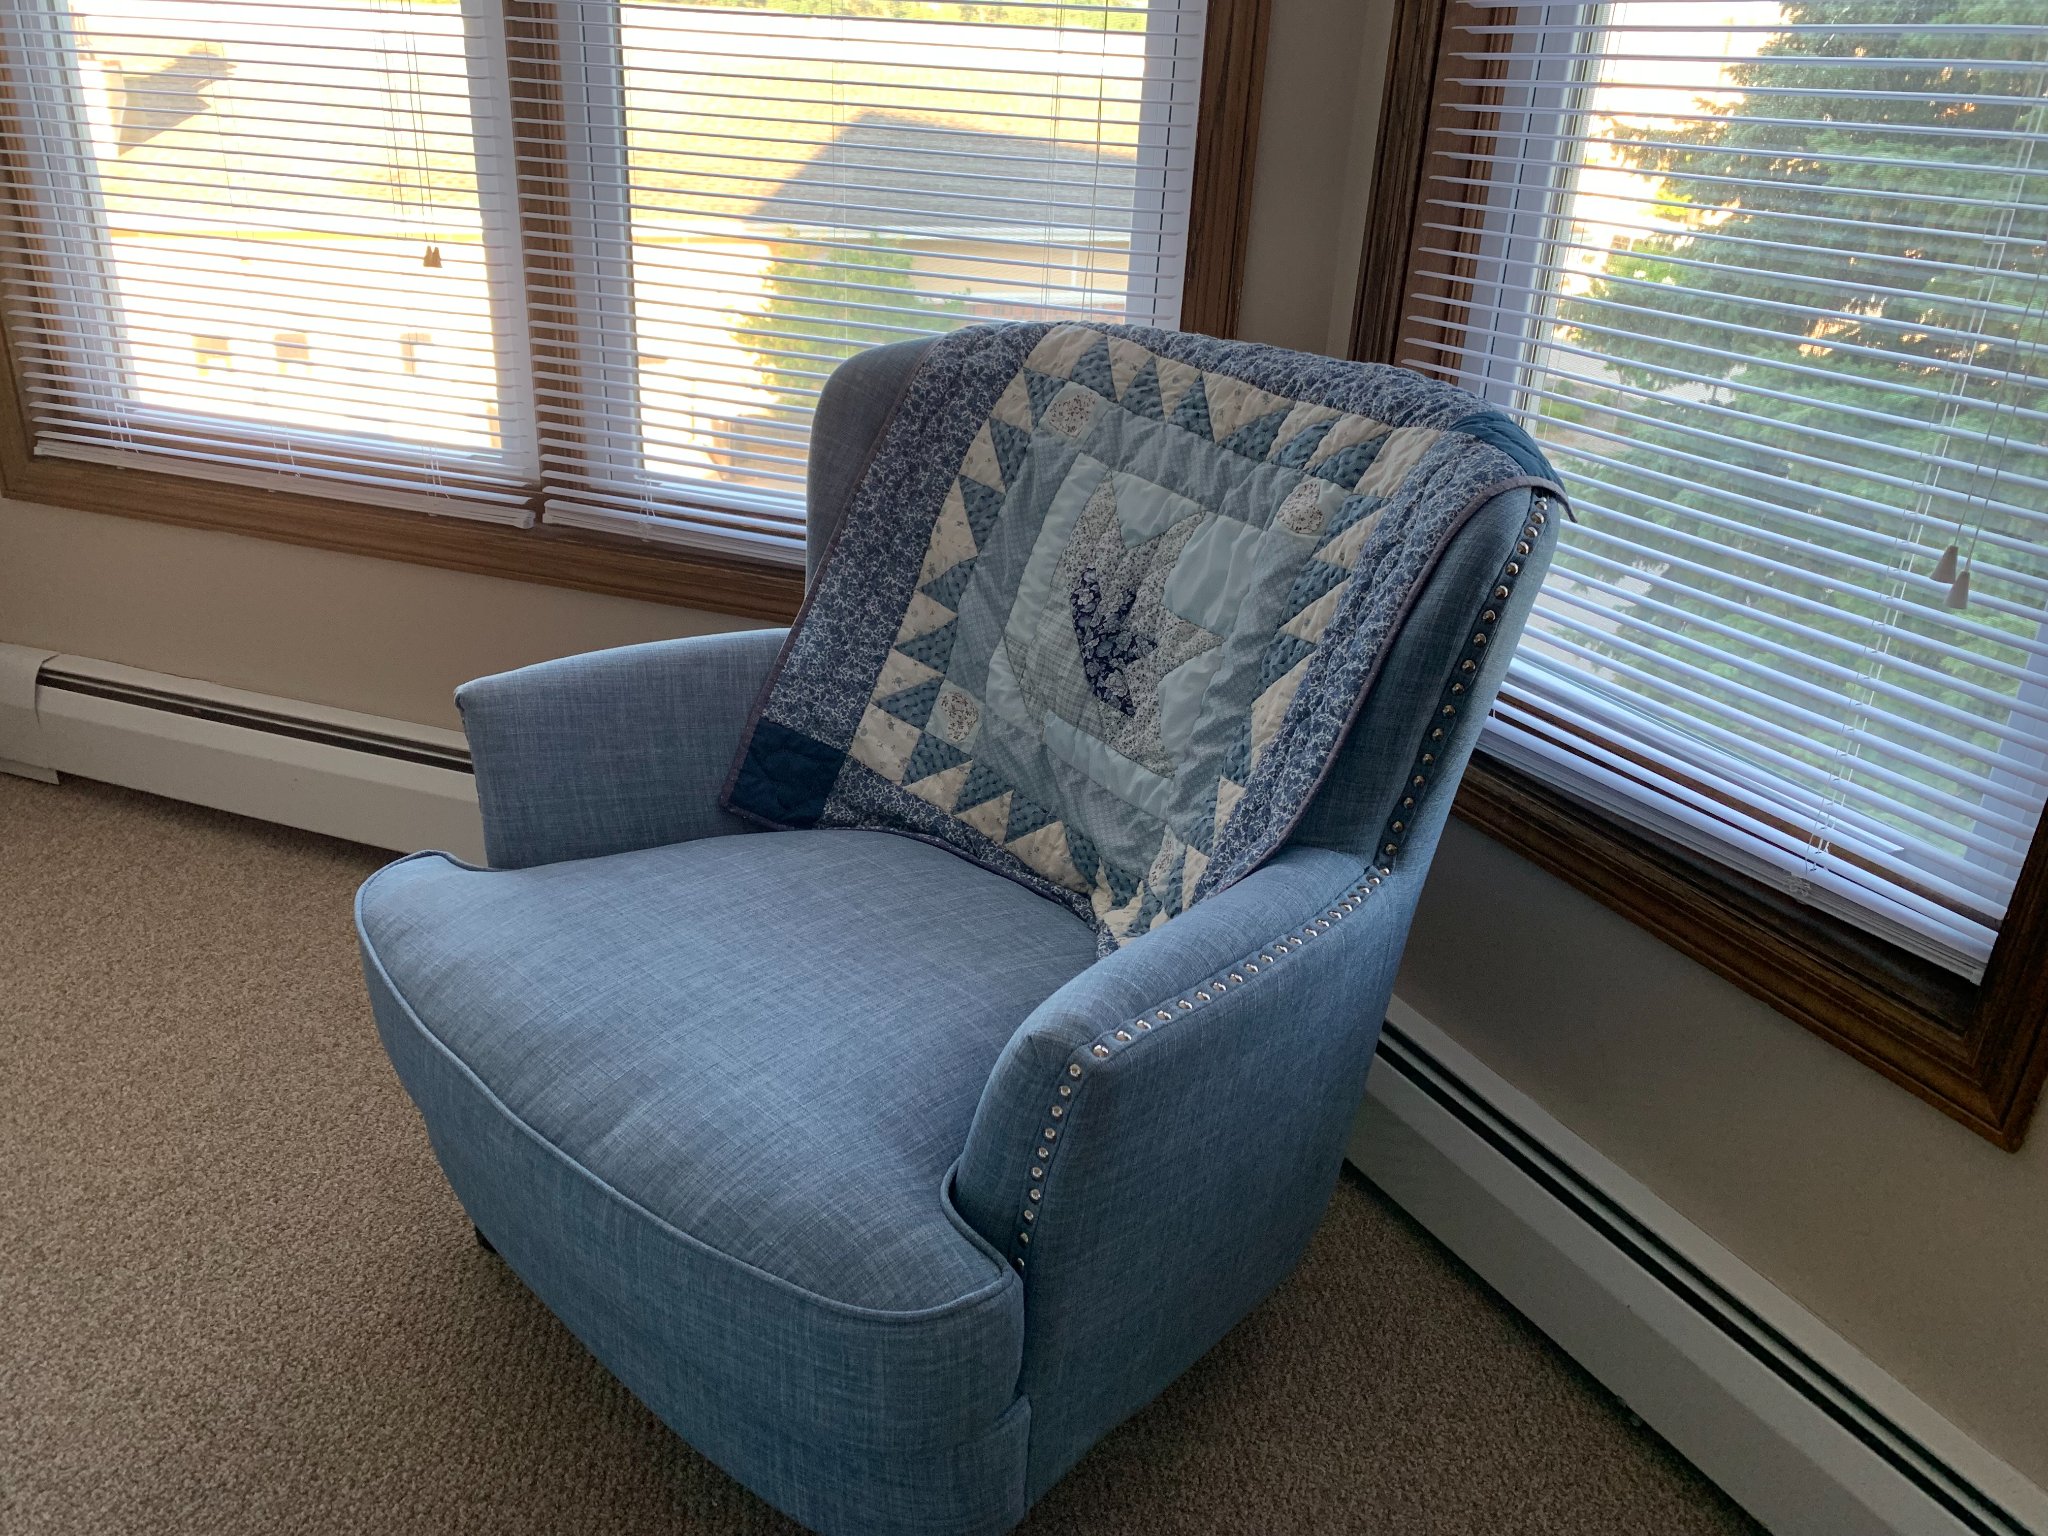 My Mom crafted the quilt draped over the back of the chair